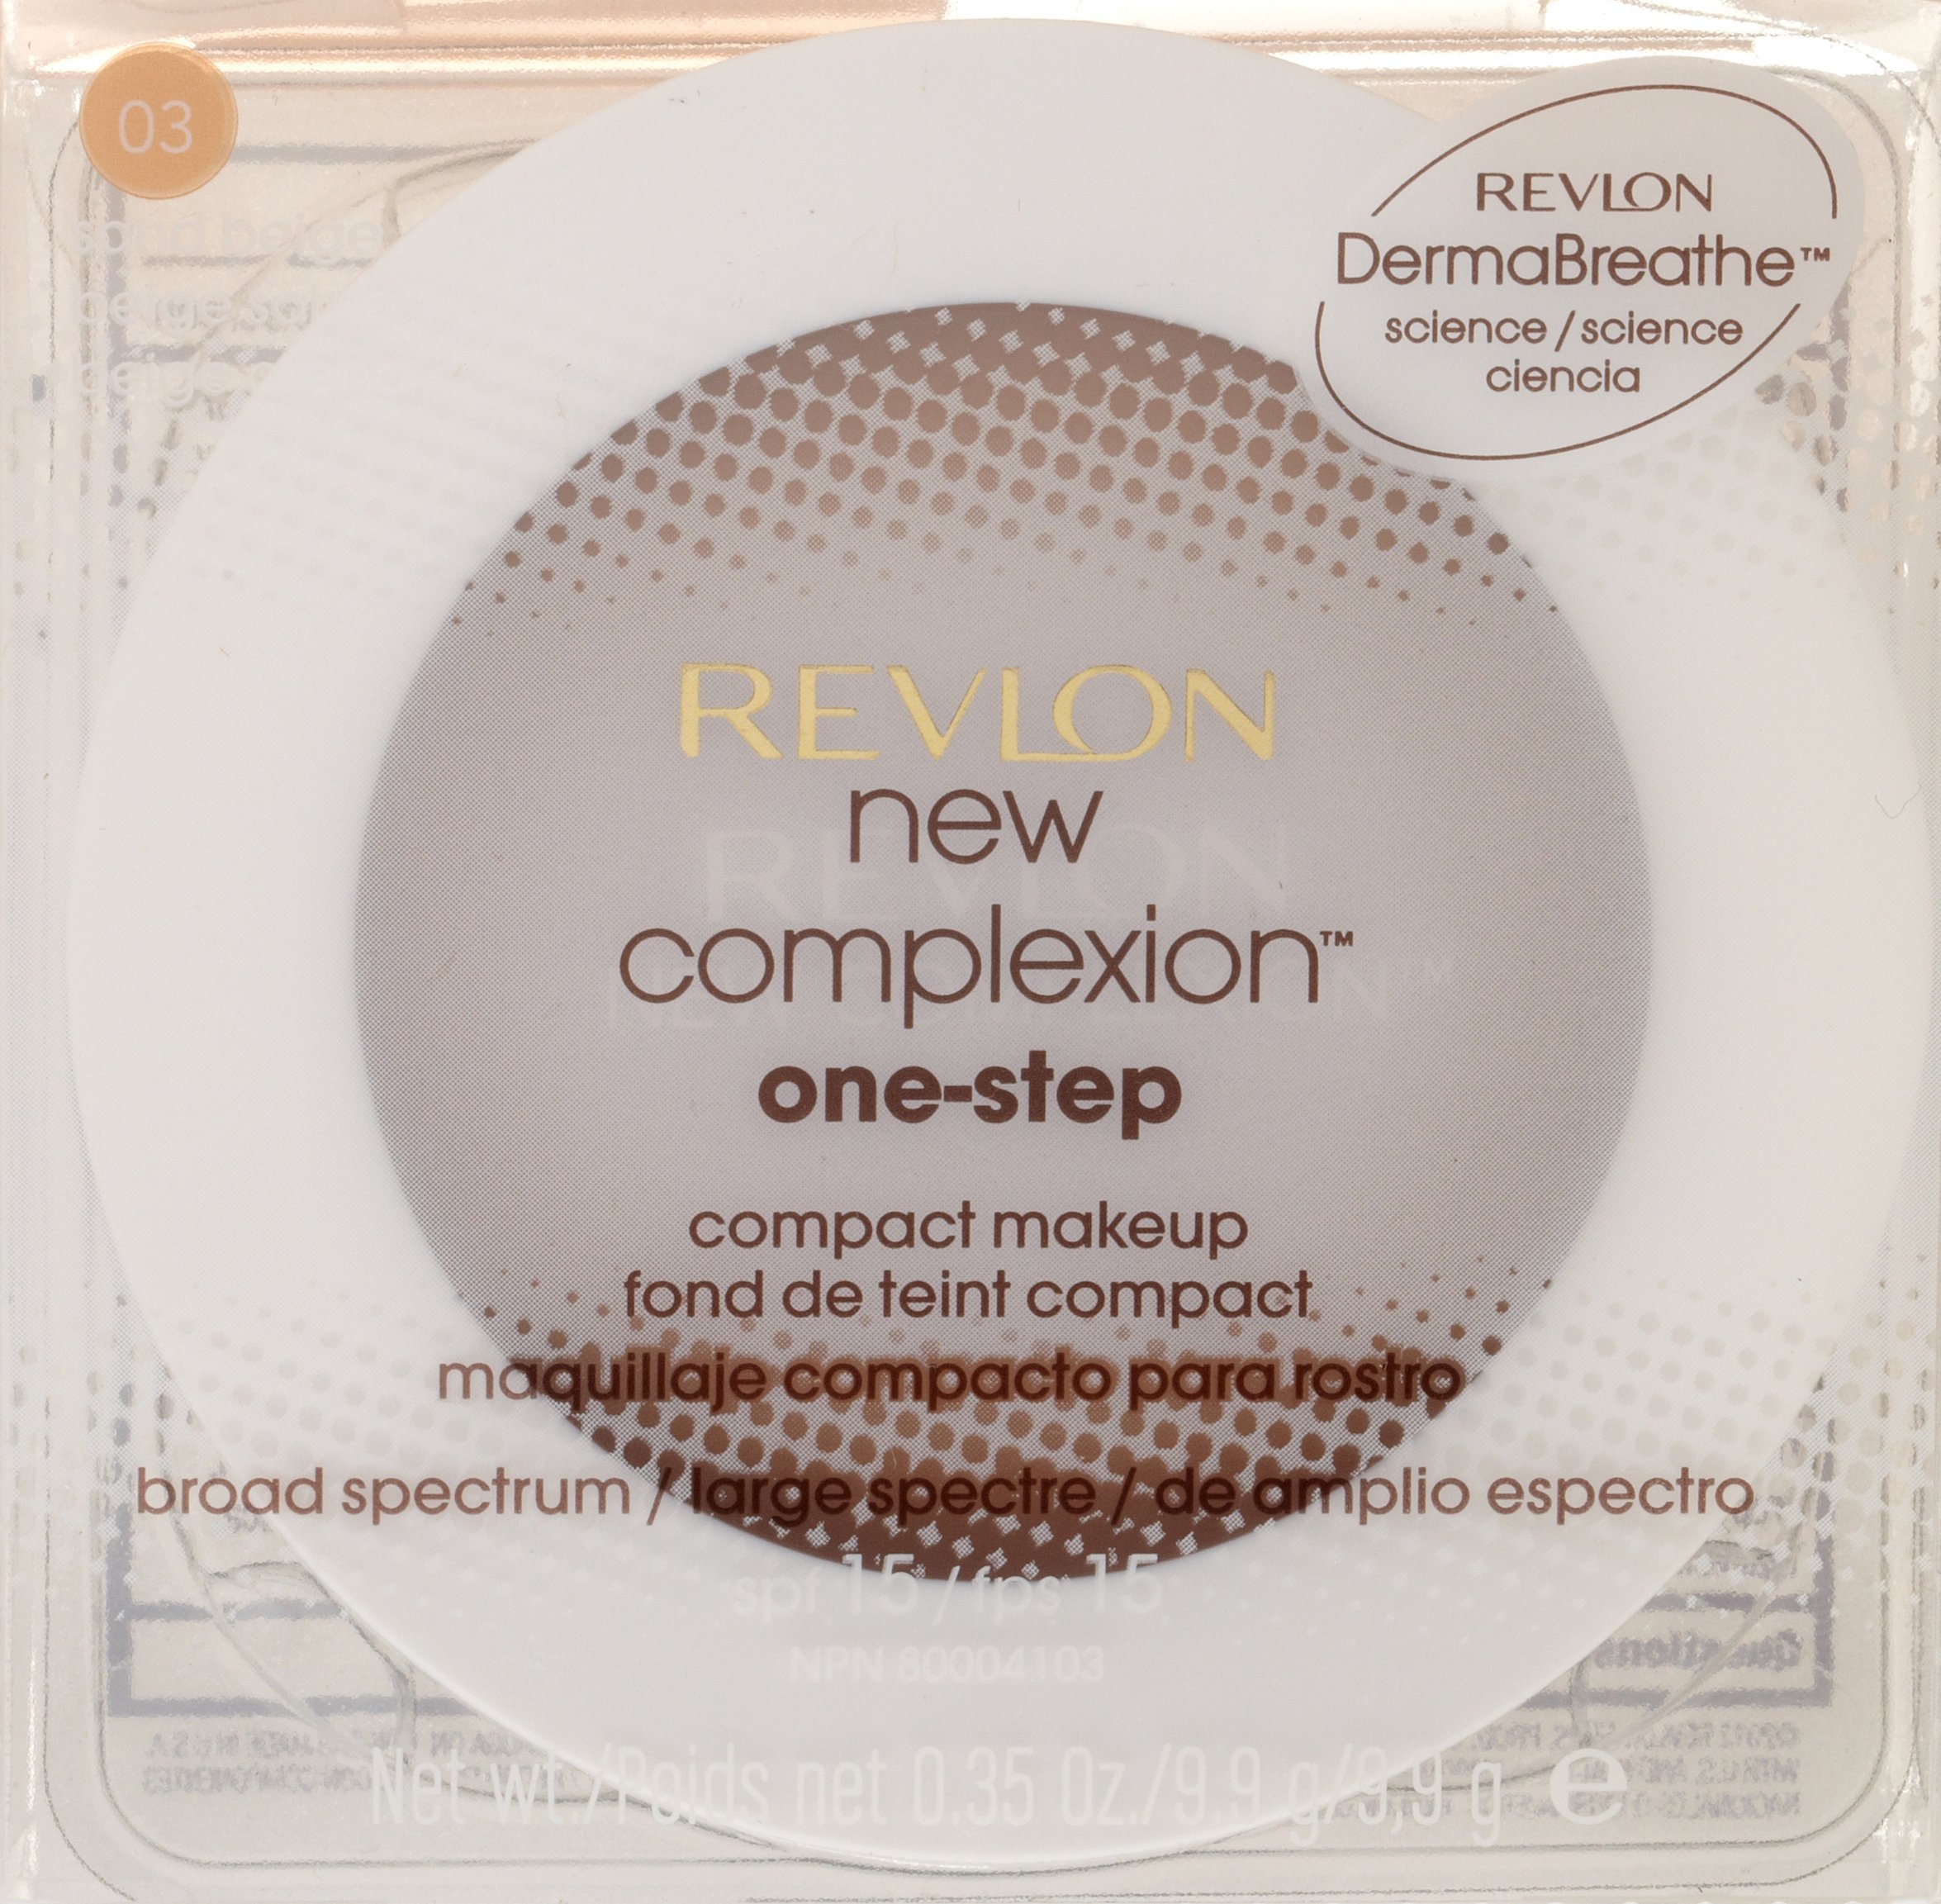 Revlon Foundation, New Complexion One-Step Face Makeup, Longwear Light Coverage with Matte Finish, SPF 15, Cream to Powder Formula, Oil Free, 003 Sand Beige, 0.35 Oz